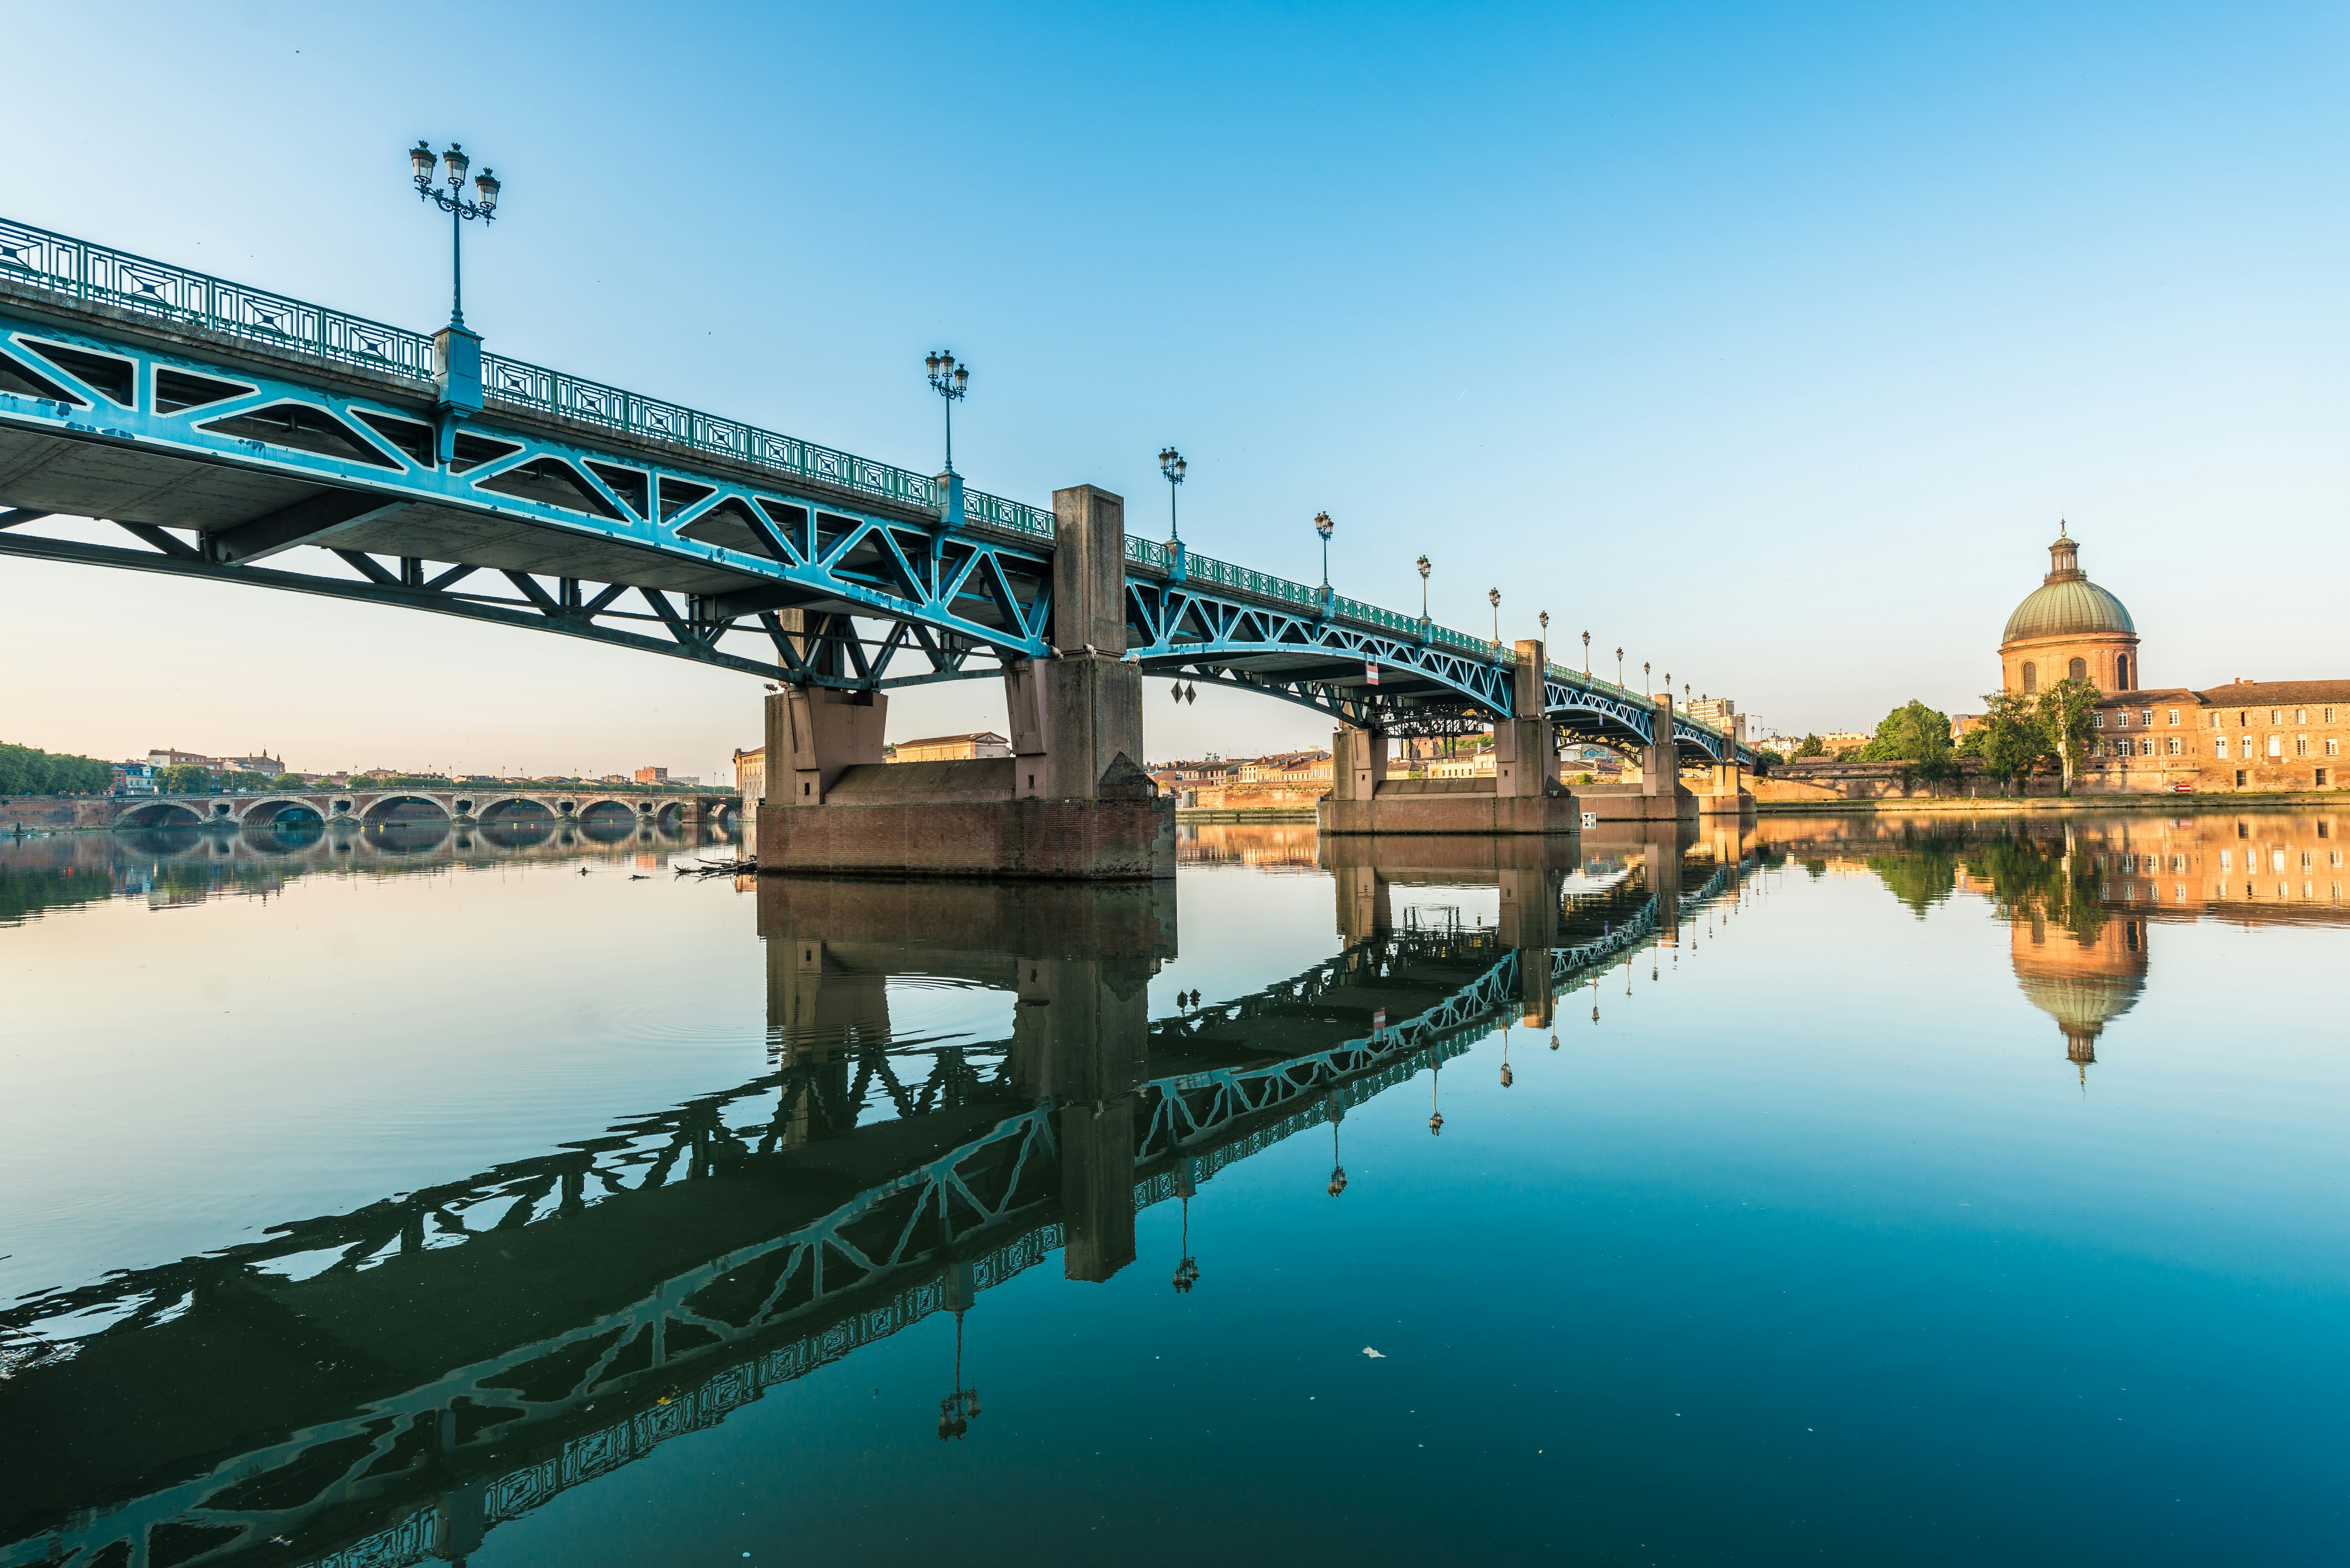 A shot of the Garonne river in the southern city of Toulouse